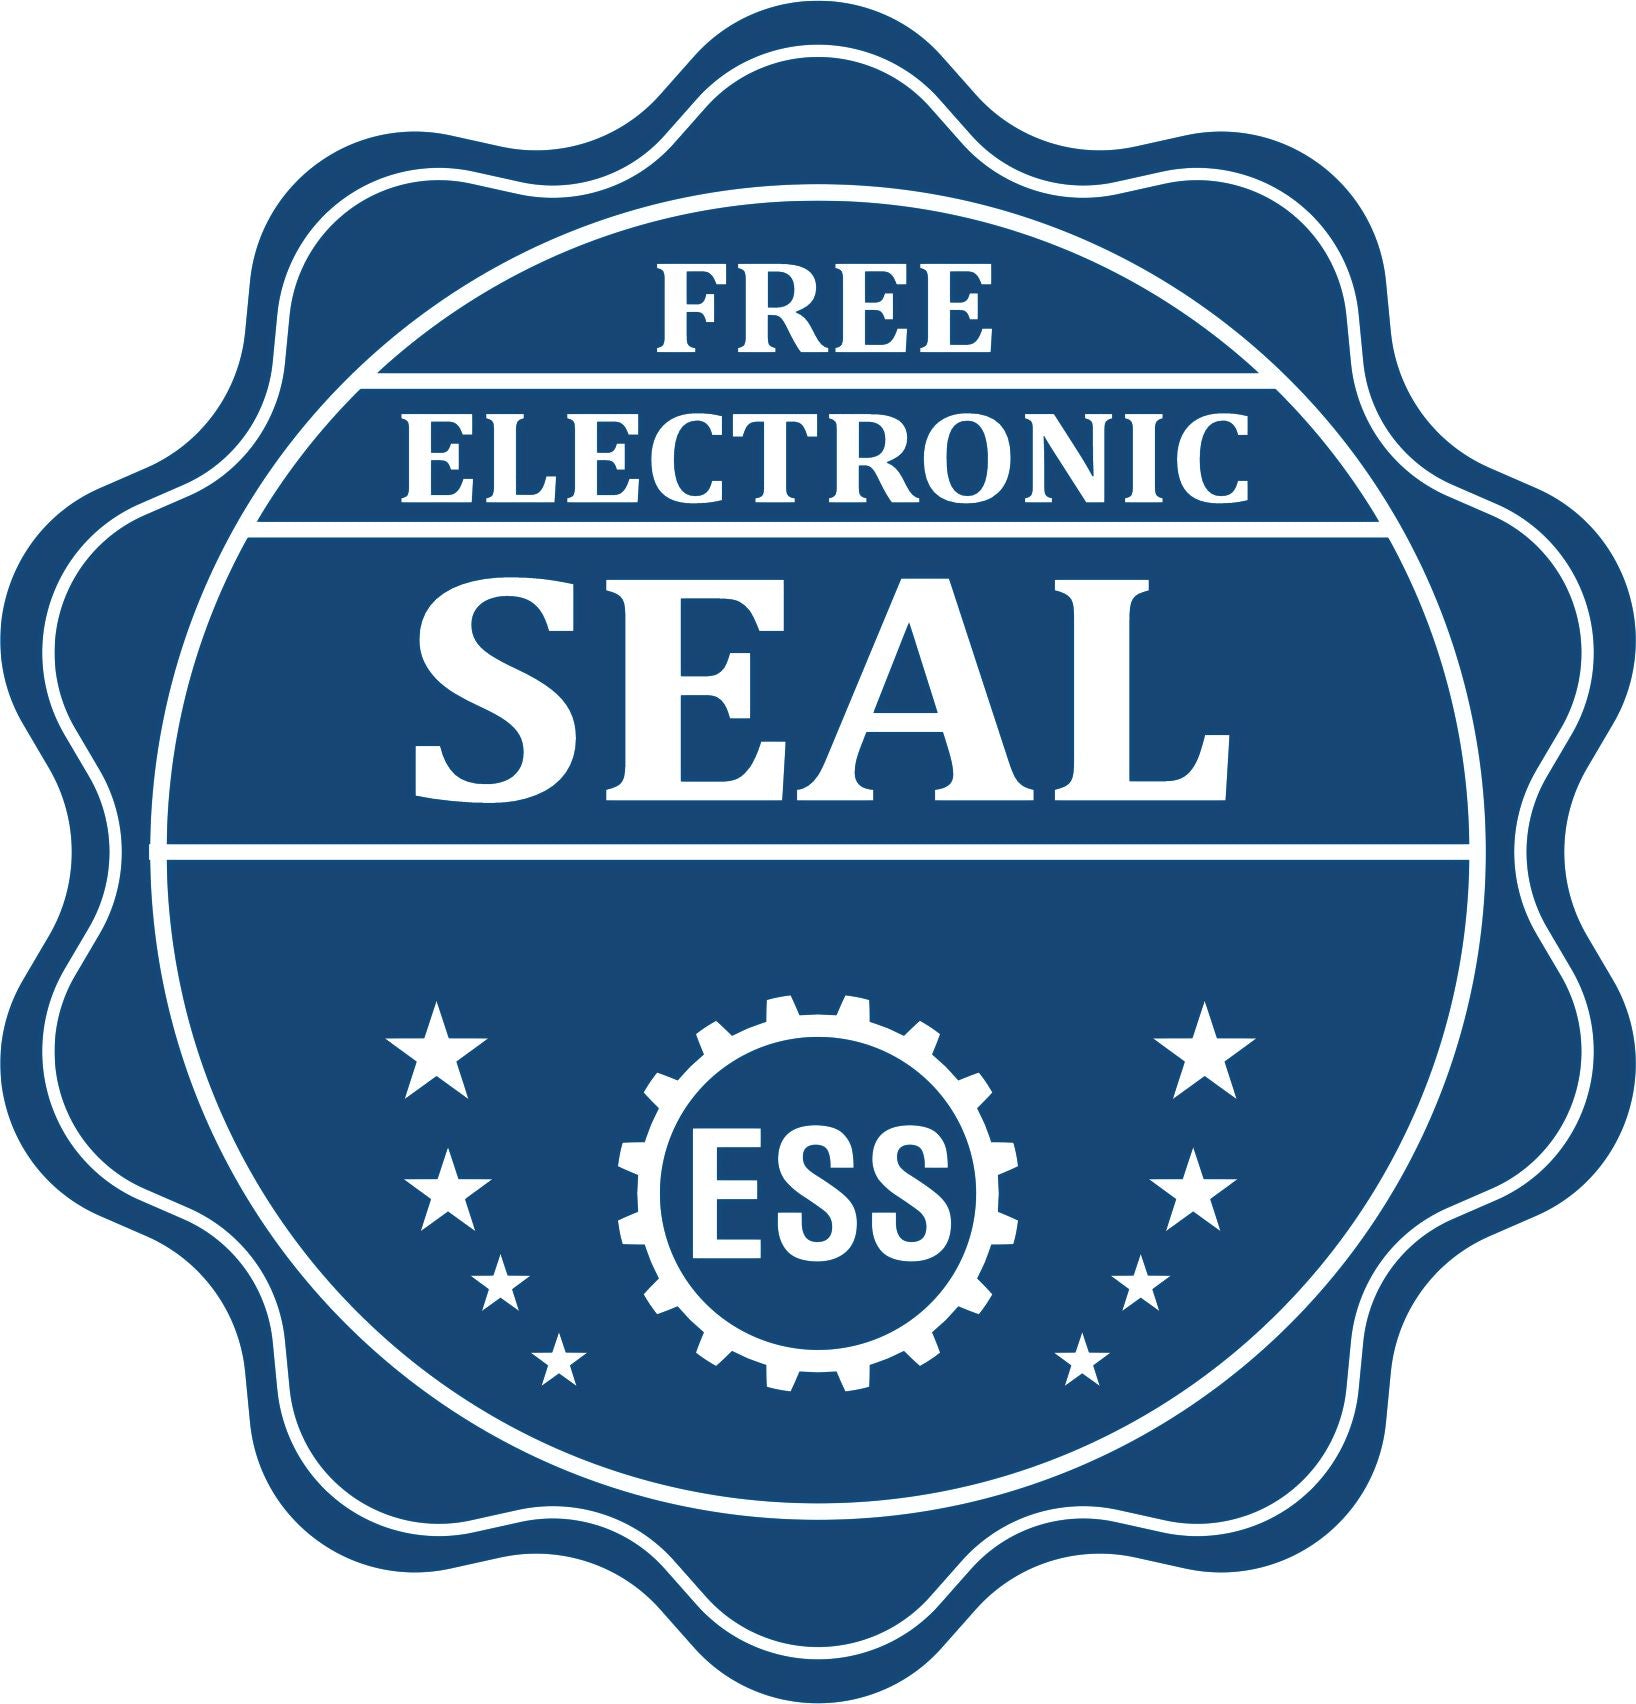 A badge showing a free electronic seal for the Slim Pre-Inked State Seal Notary Stamp for Oklahoma with stars and the ESS gear on the emblem.